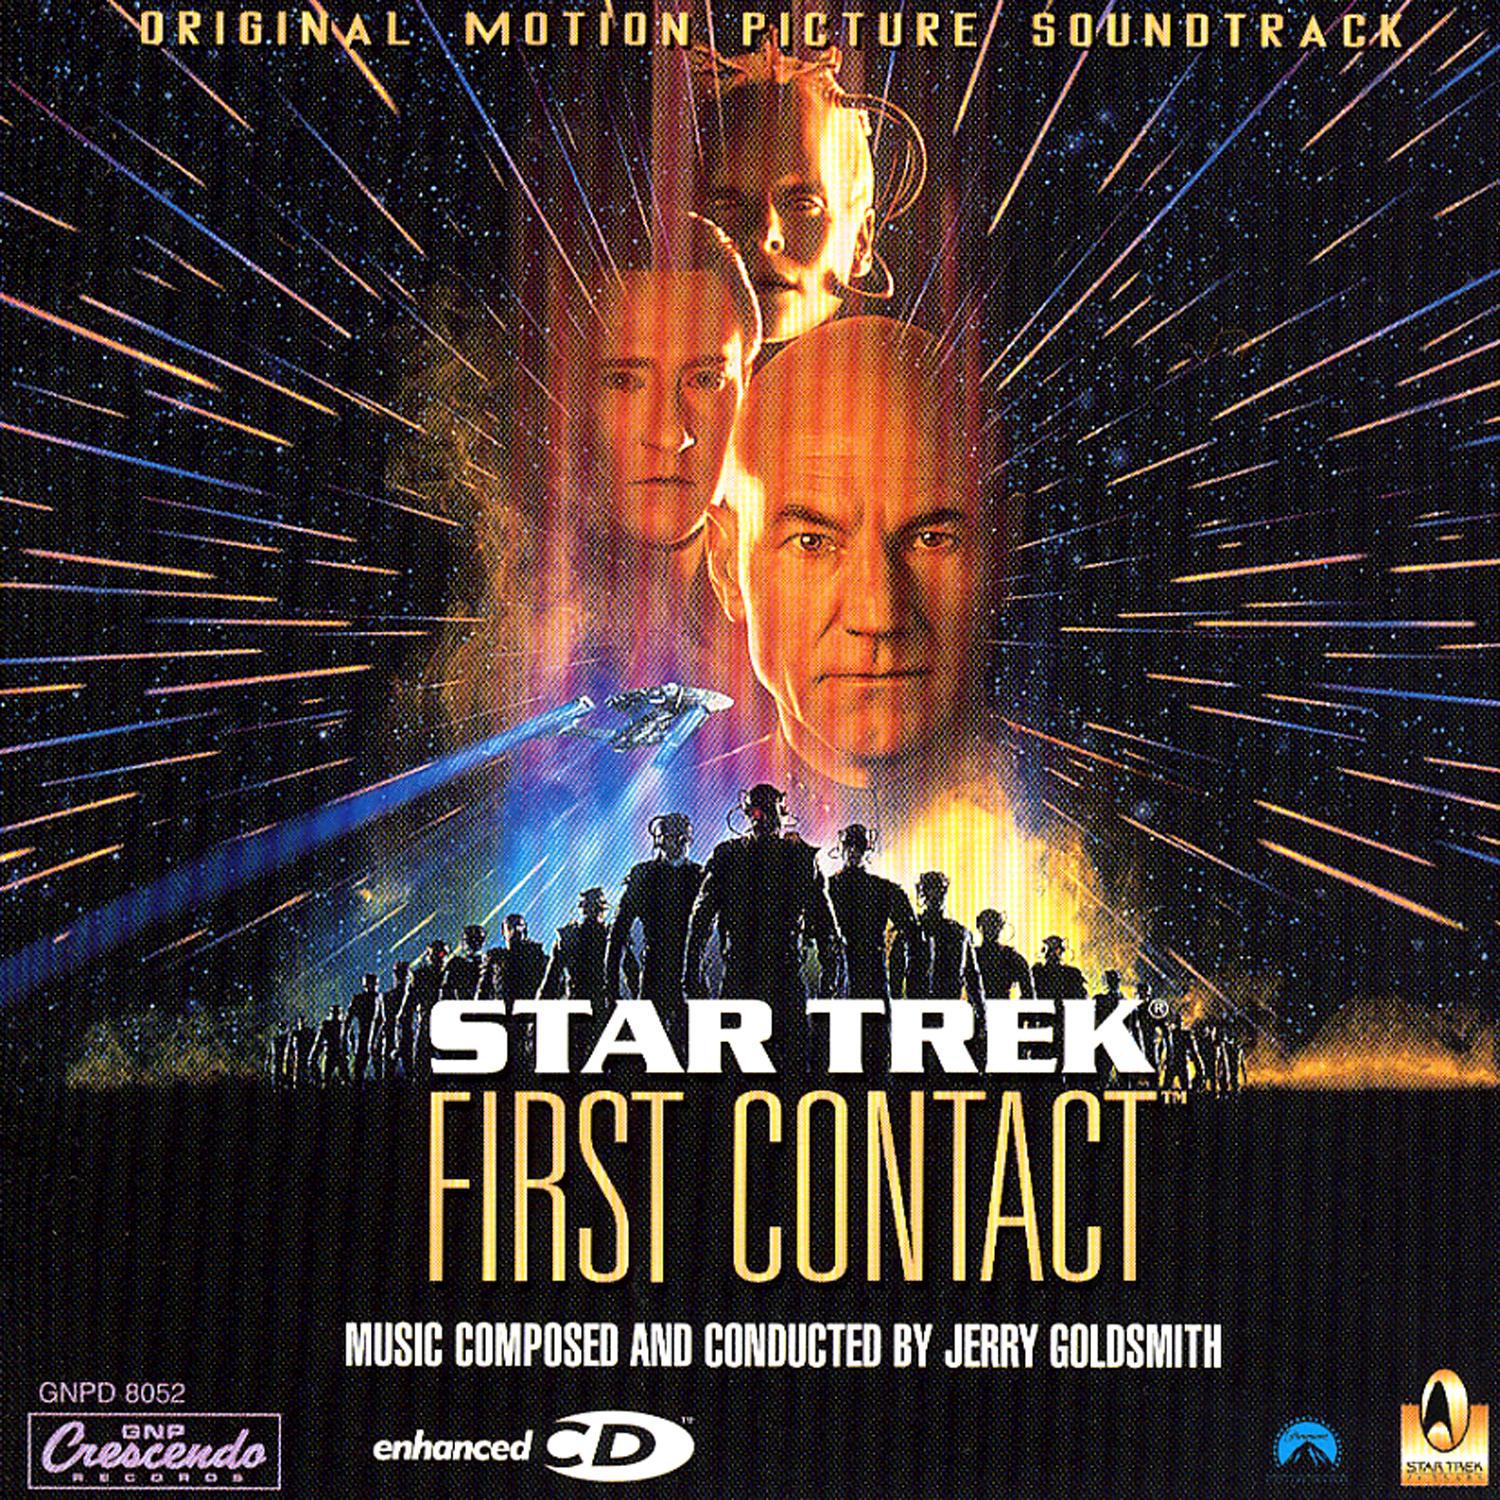 "Star Trek: First Contact" - Original Motion Picture Soundtrack